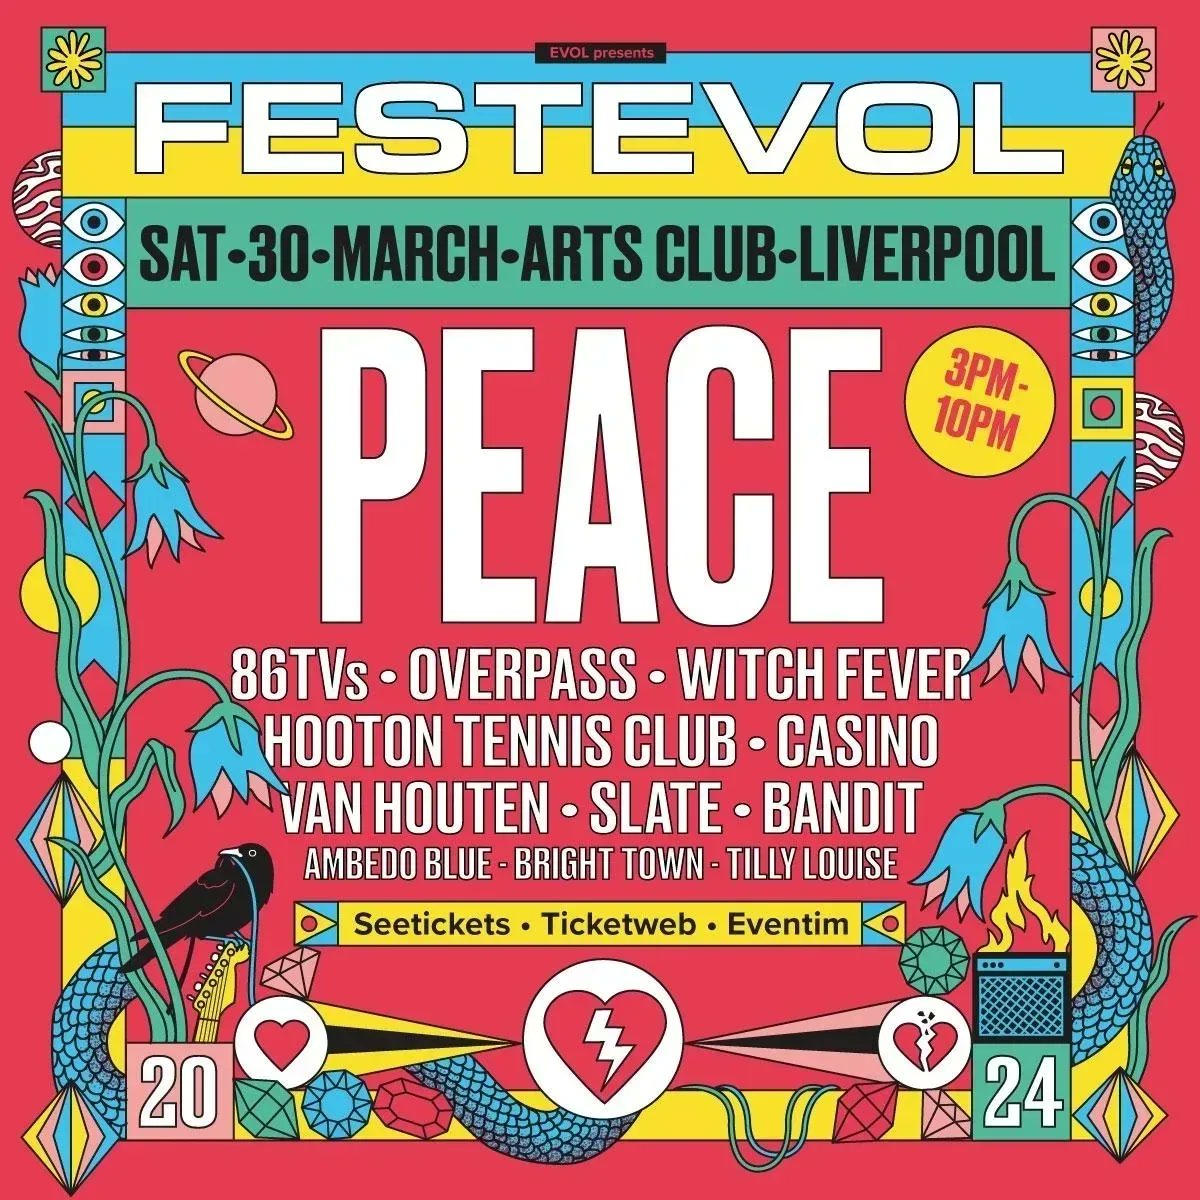 Always pouring her heart & soul into killer live shows - indie pop-punk powerhouse @tillyloumusic plays #FestEvol24 all-dayer alongside @PEACE4EVEREVER, Saturday March 30th at @artsclublpool! Tickets @seetickets: seetickets.com/event/festevol…